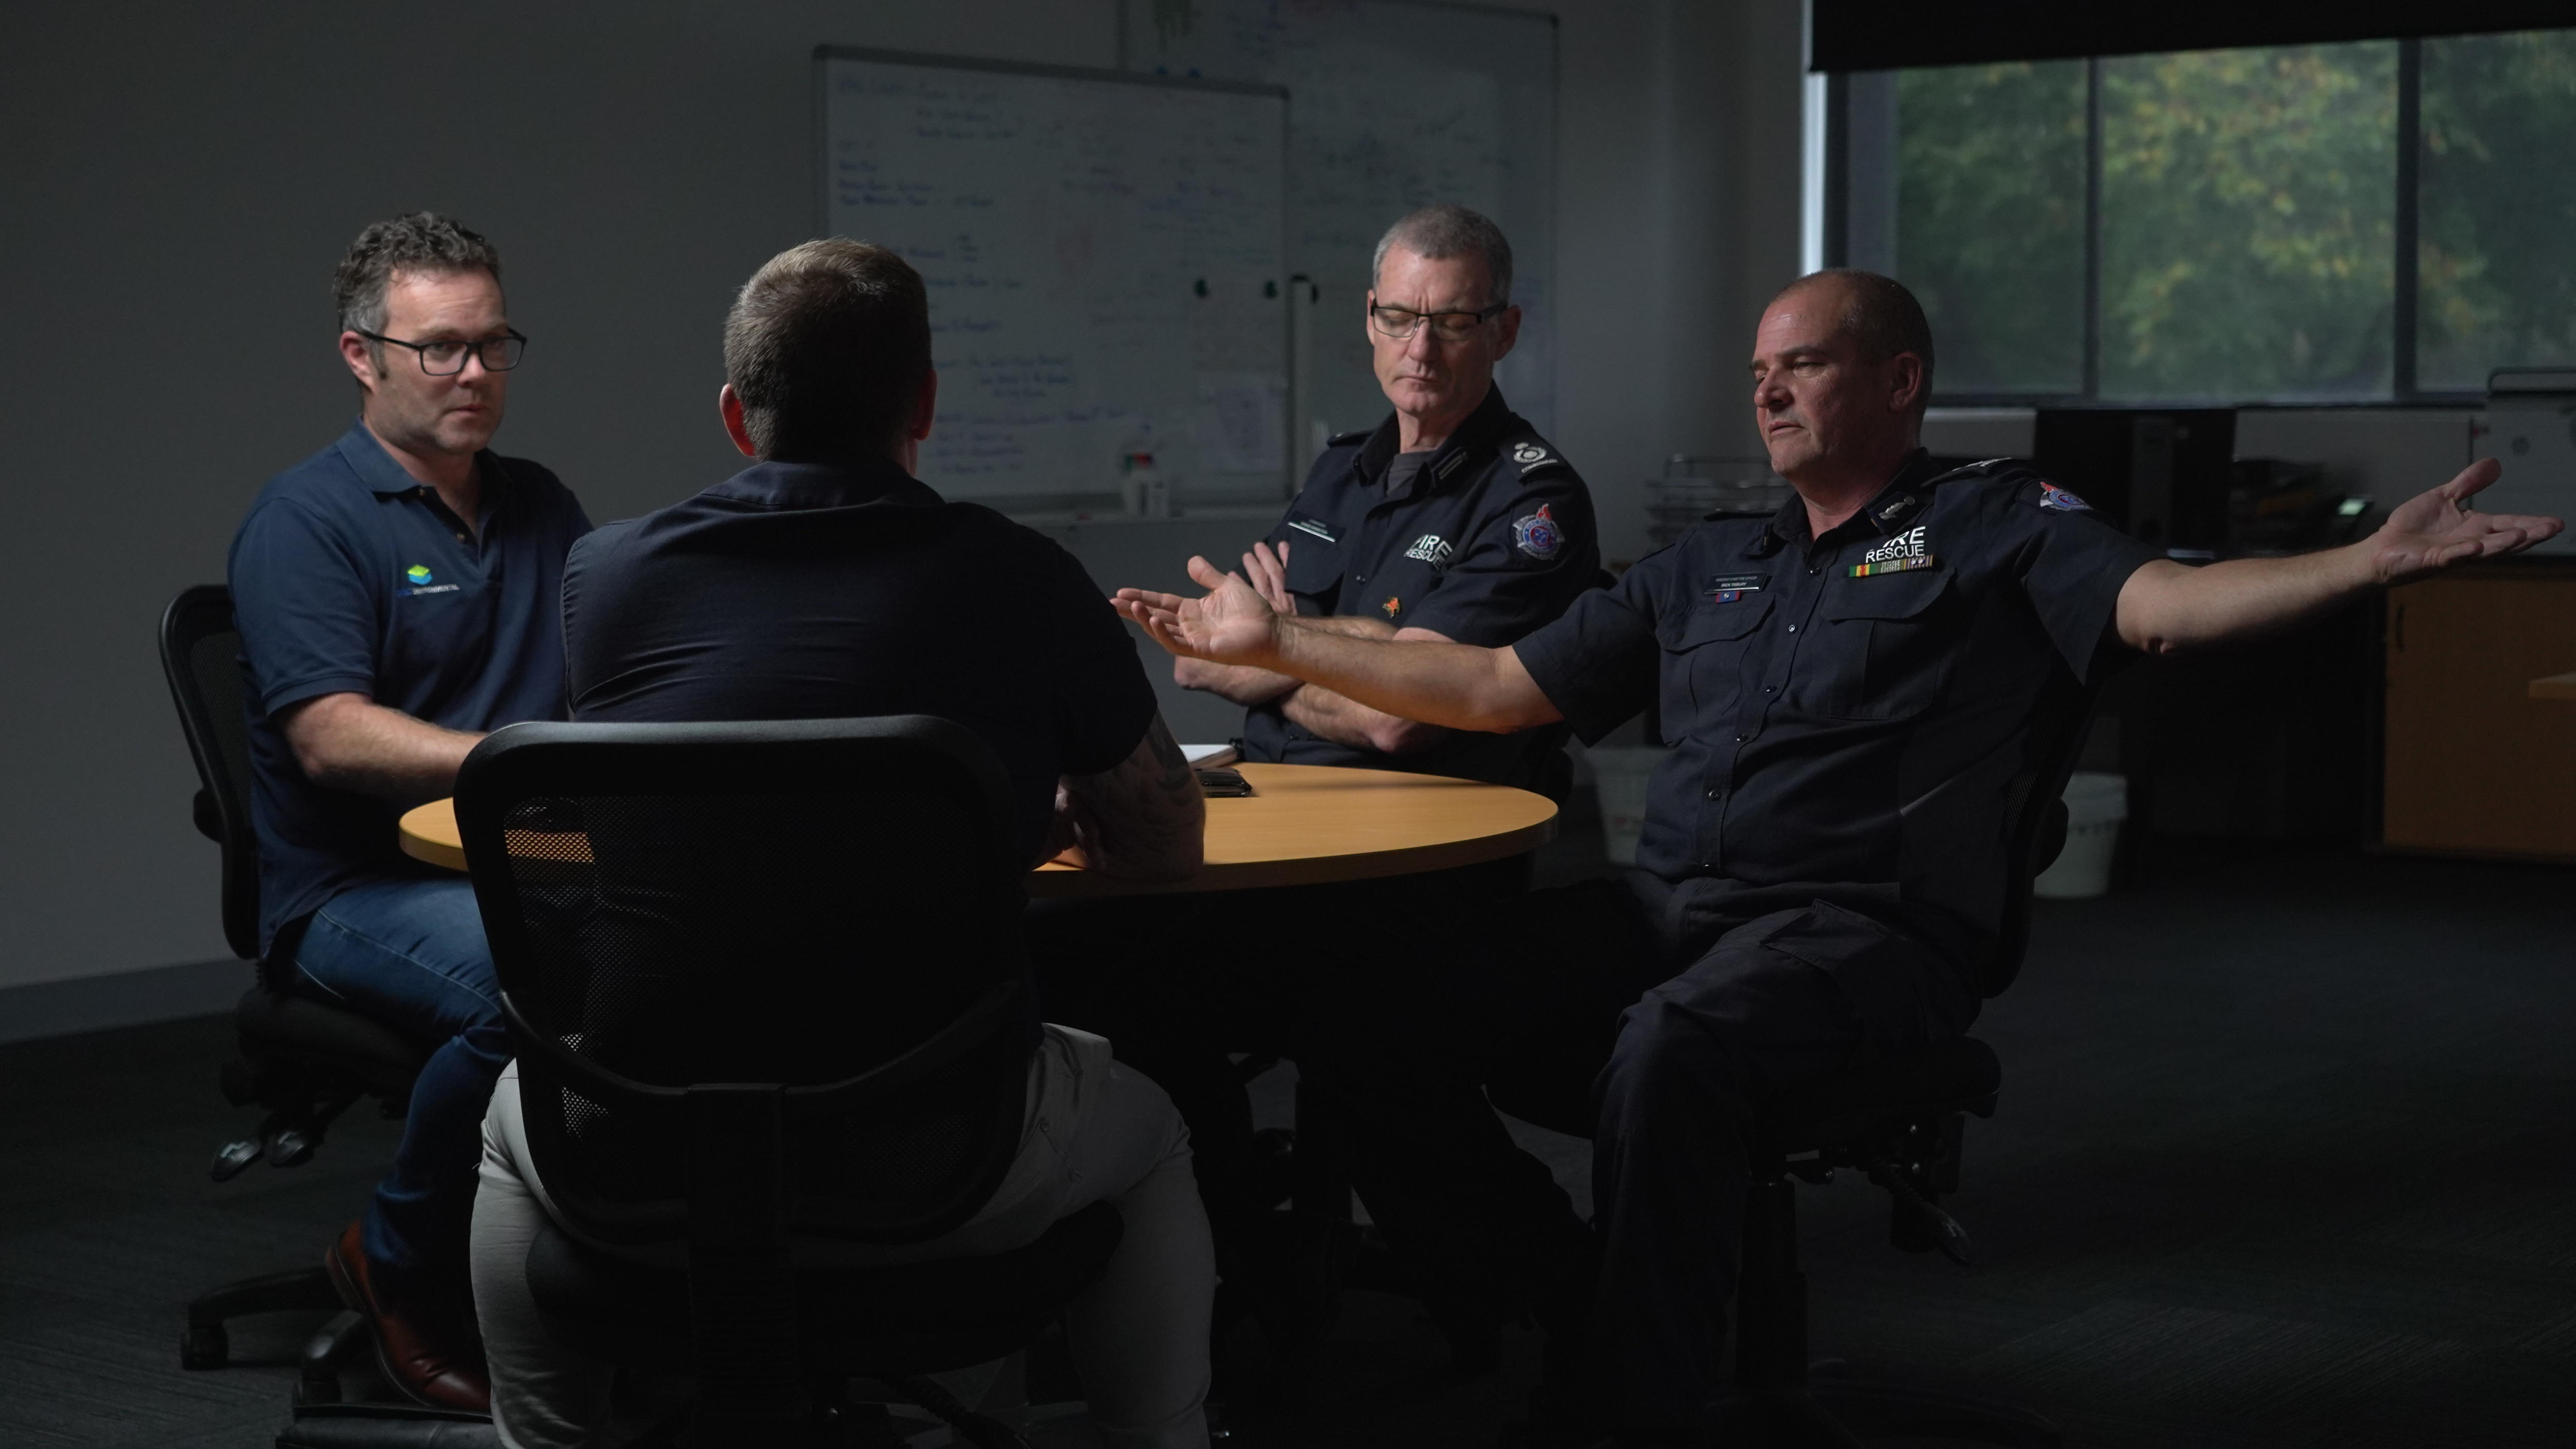 Four male firefighters in navy uniforms chat at a round table 